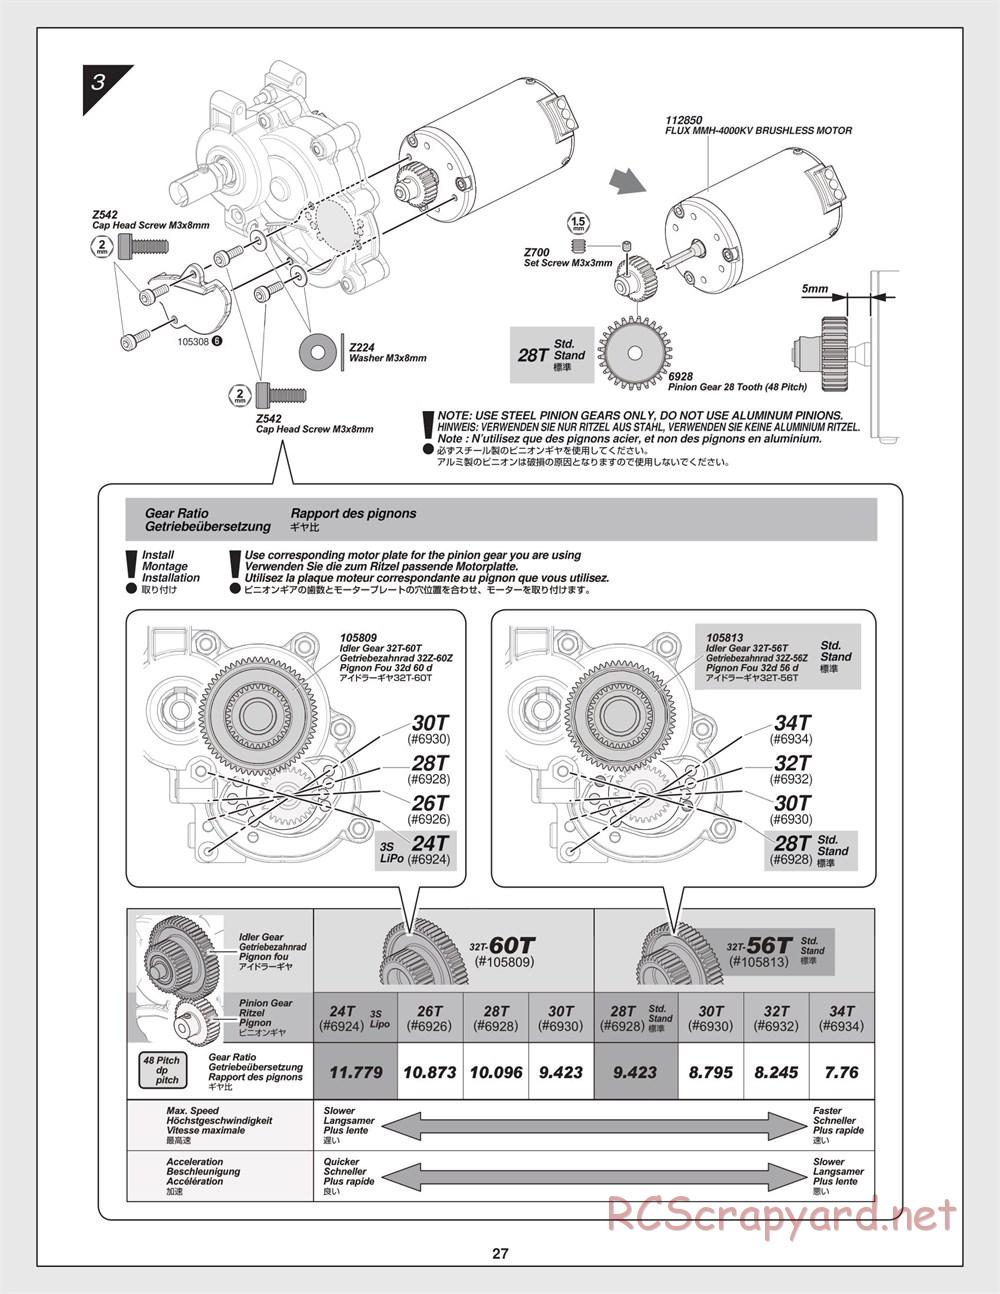 HPI - Savage XS Flux - Manual - Page 27